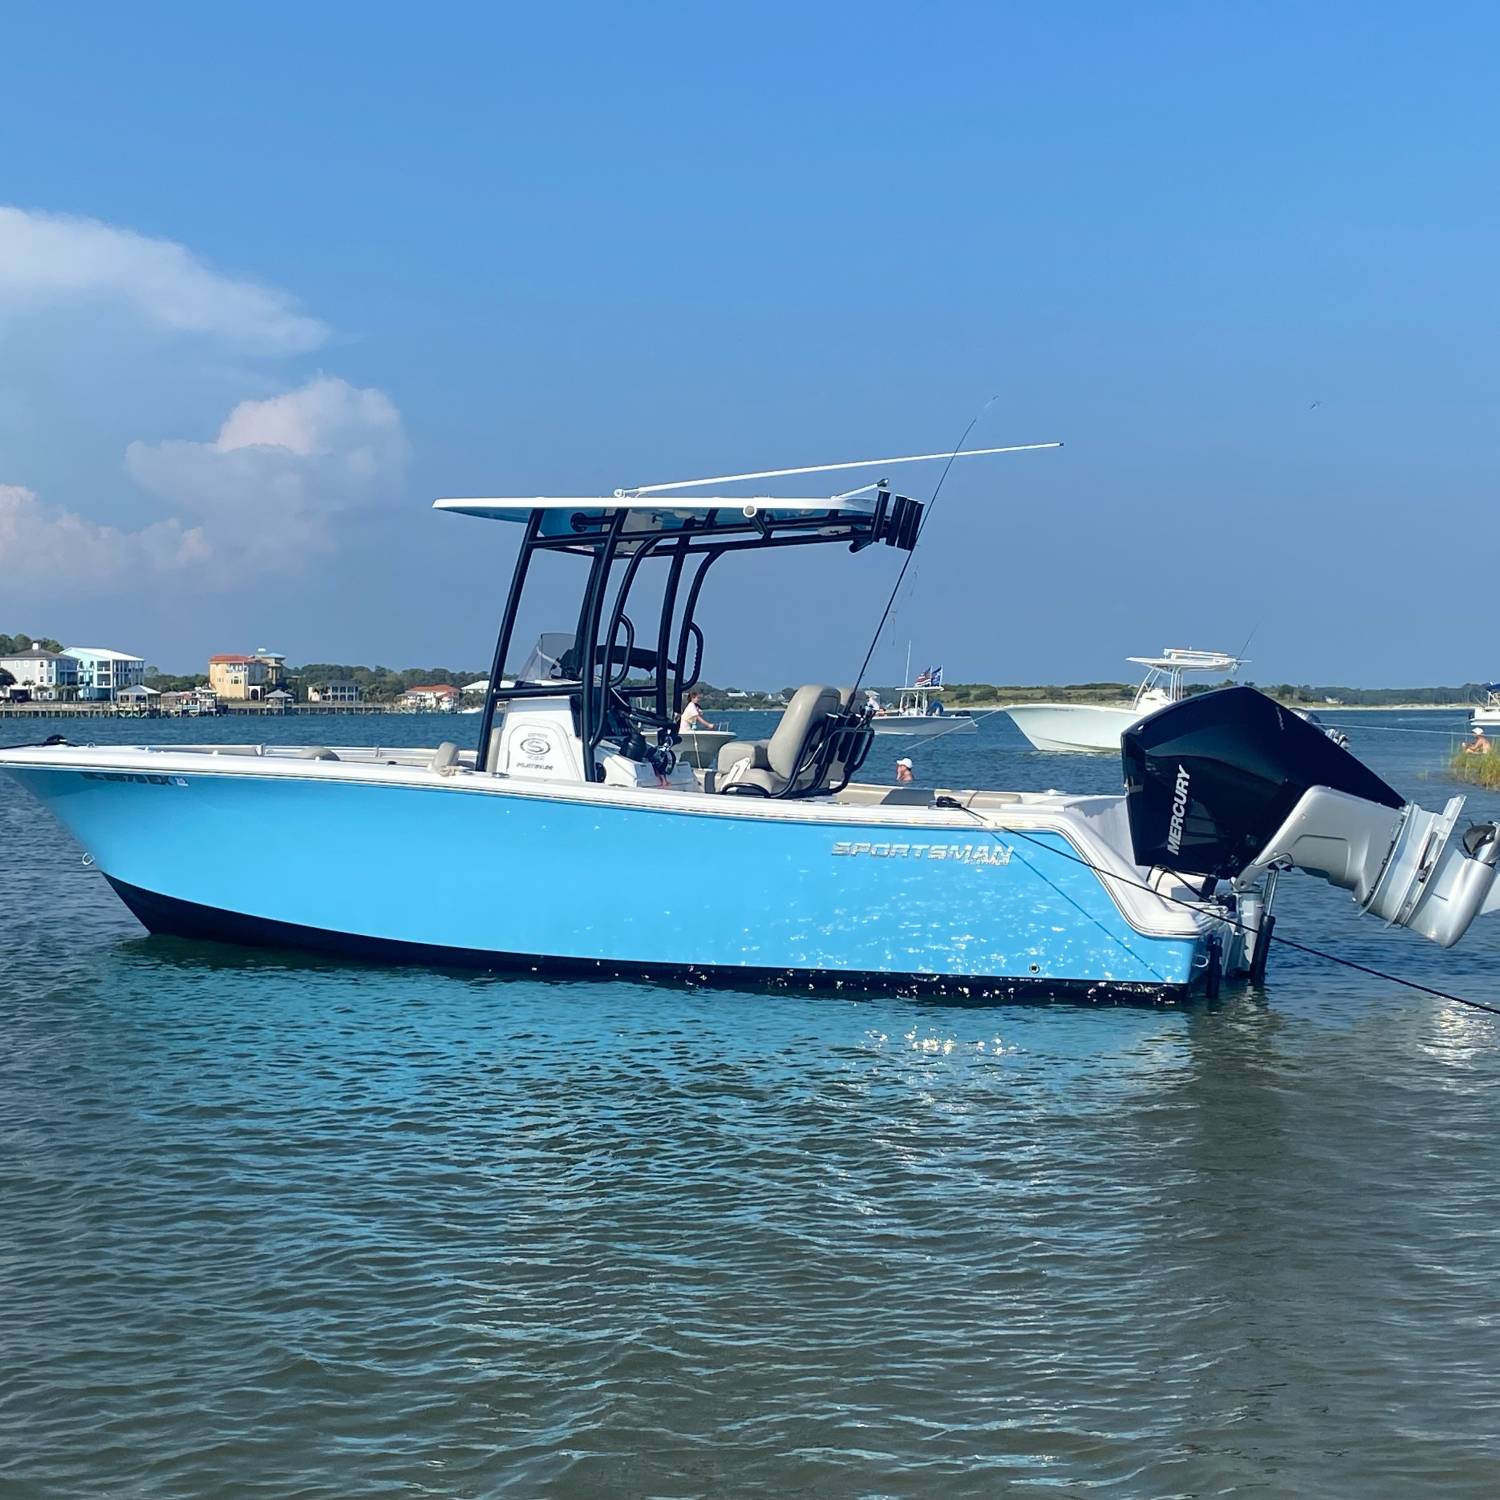 These are a few pictures of the boat at the sandbar.